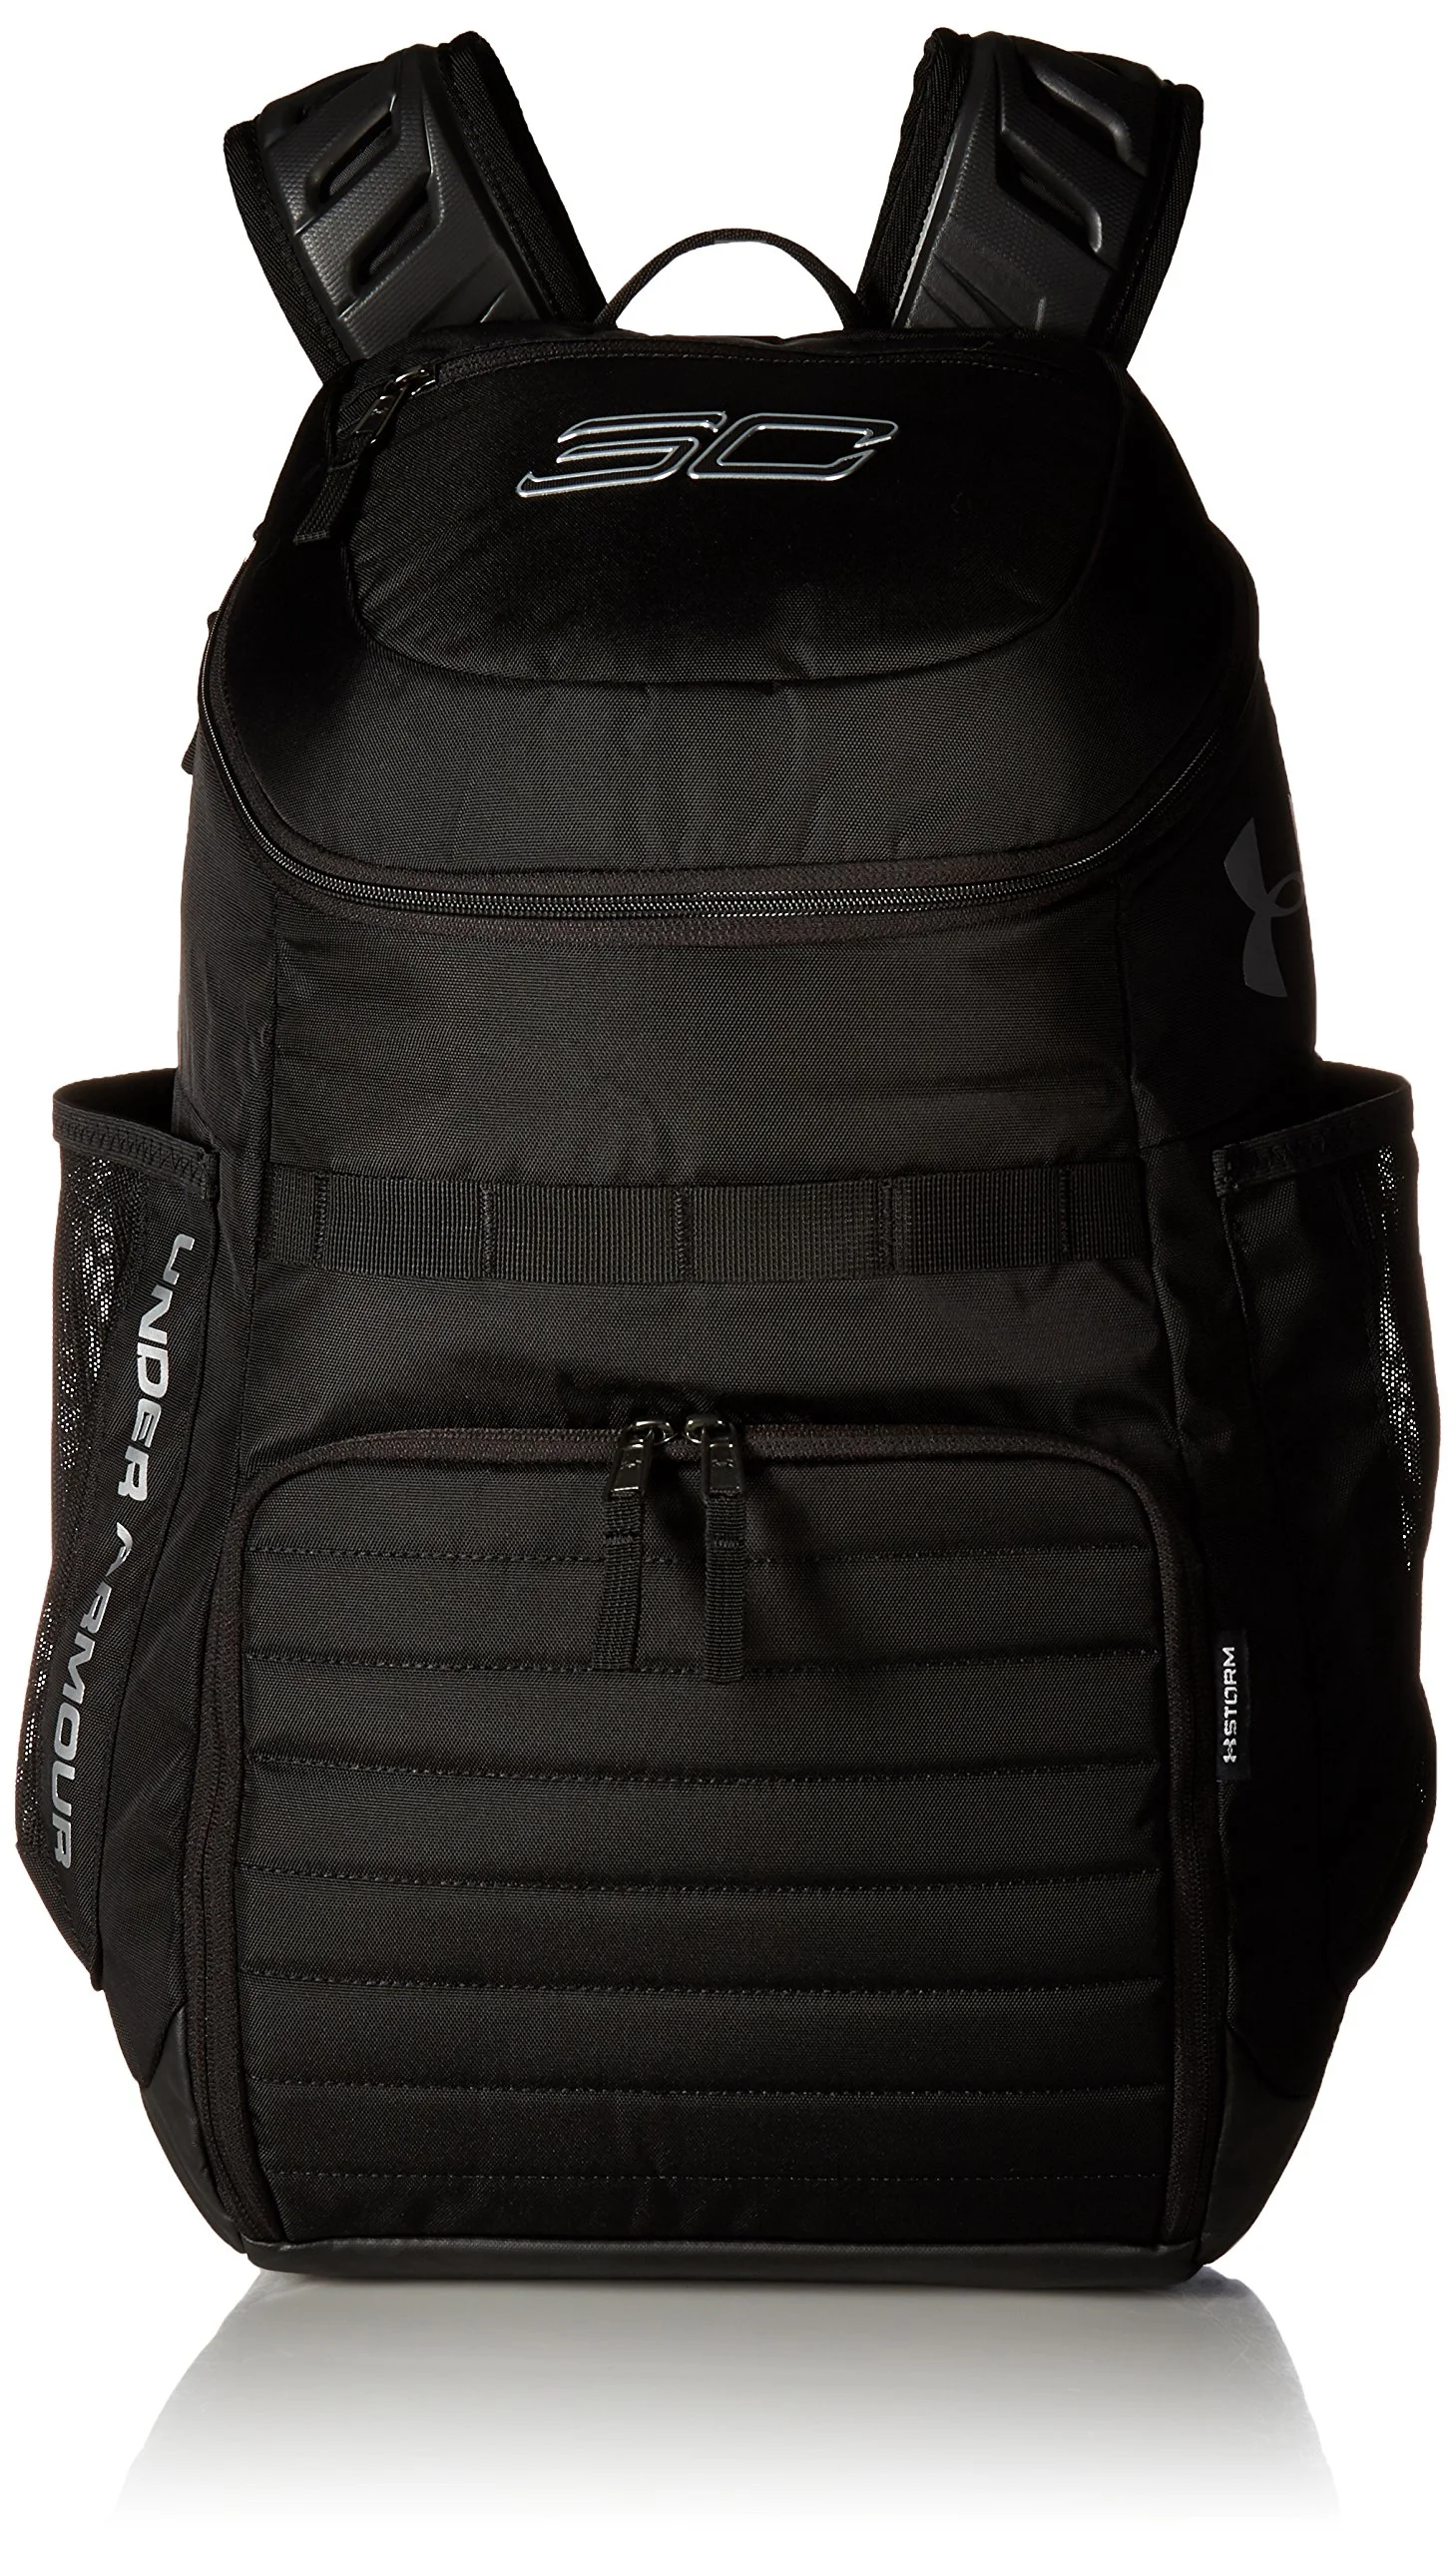 Nominal desnudo localizar Under Armour + SC30 Undeniable Backpack